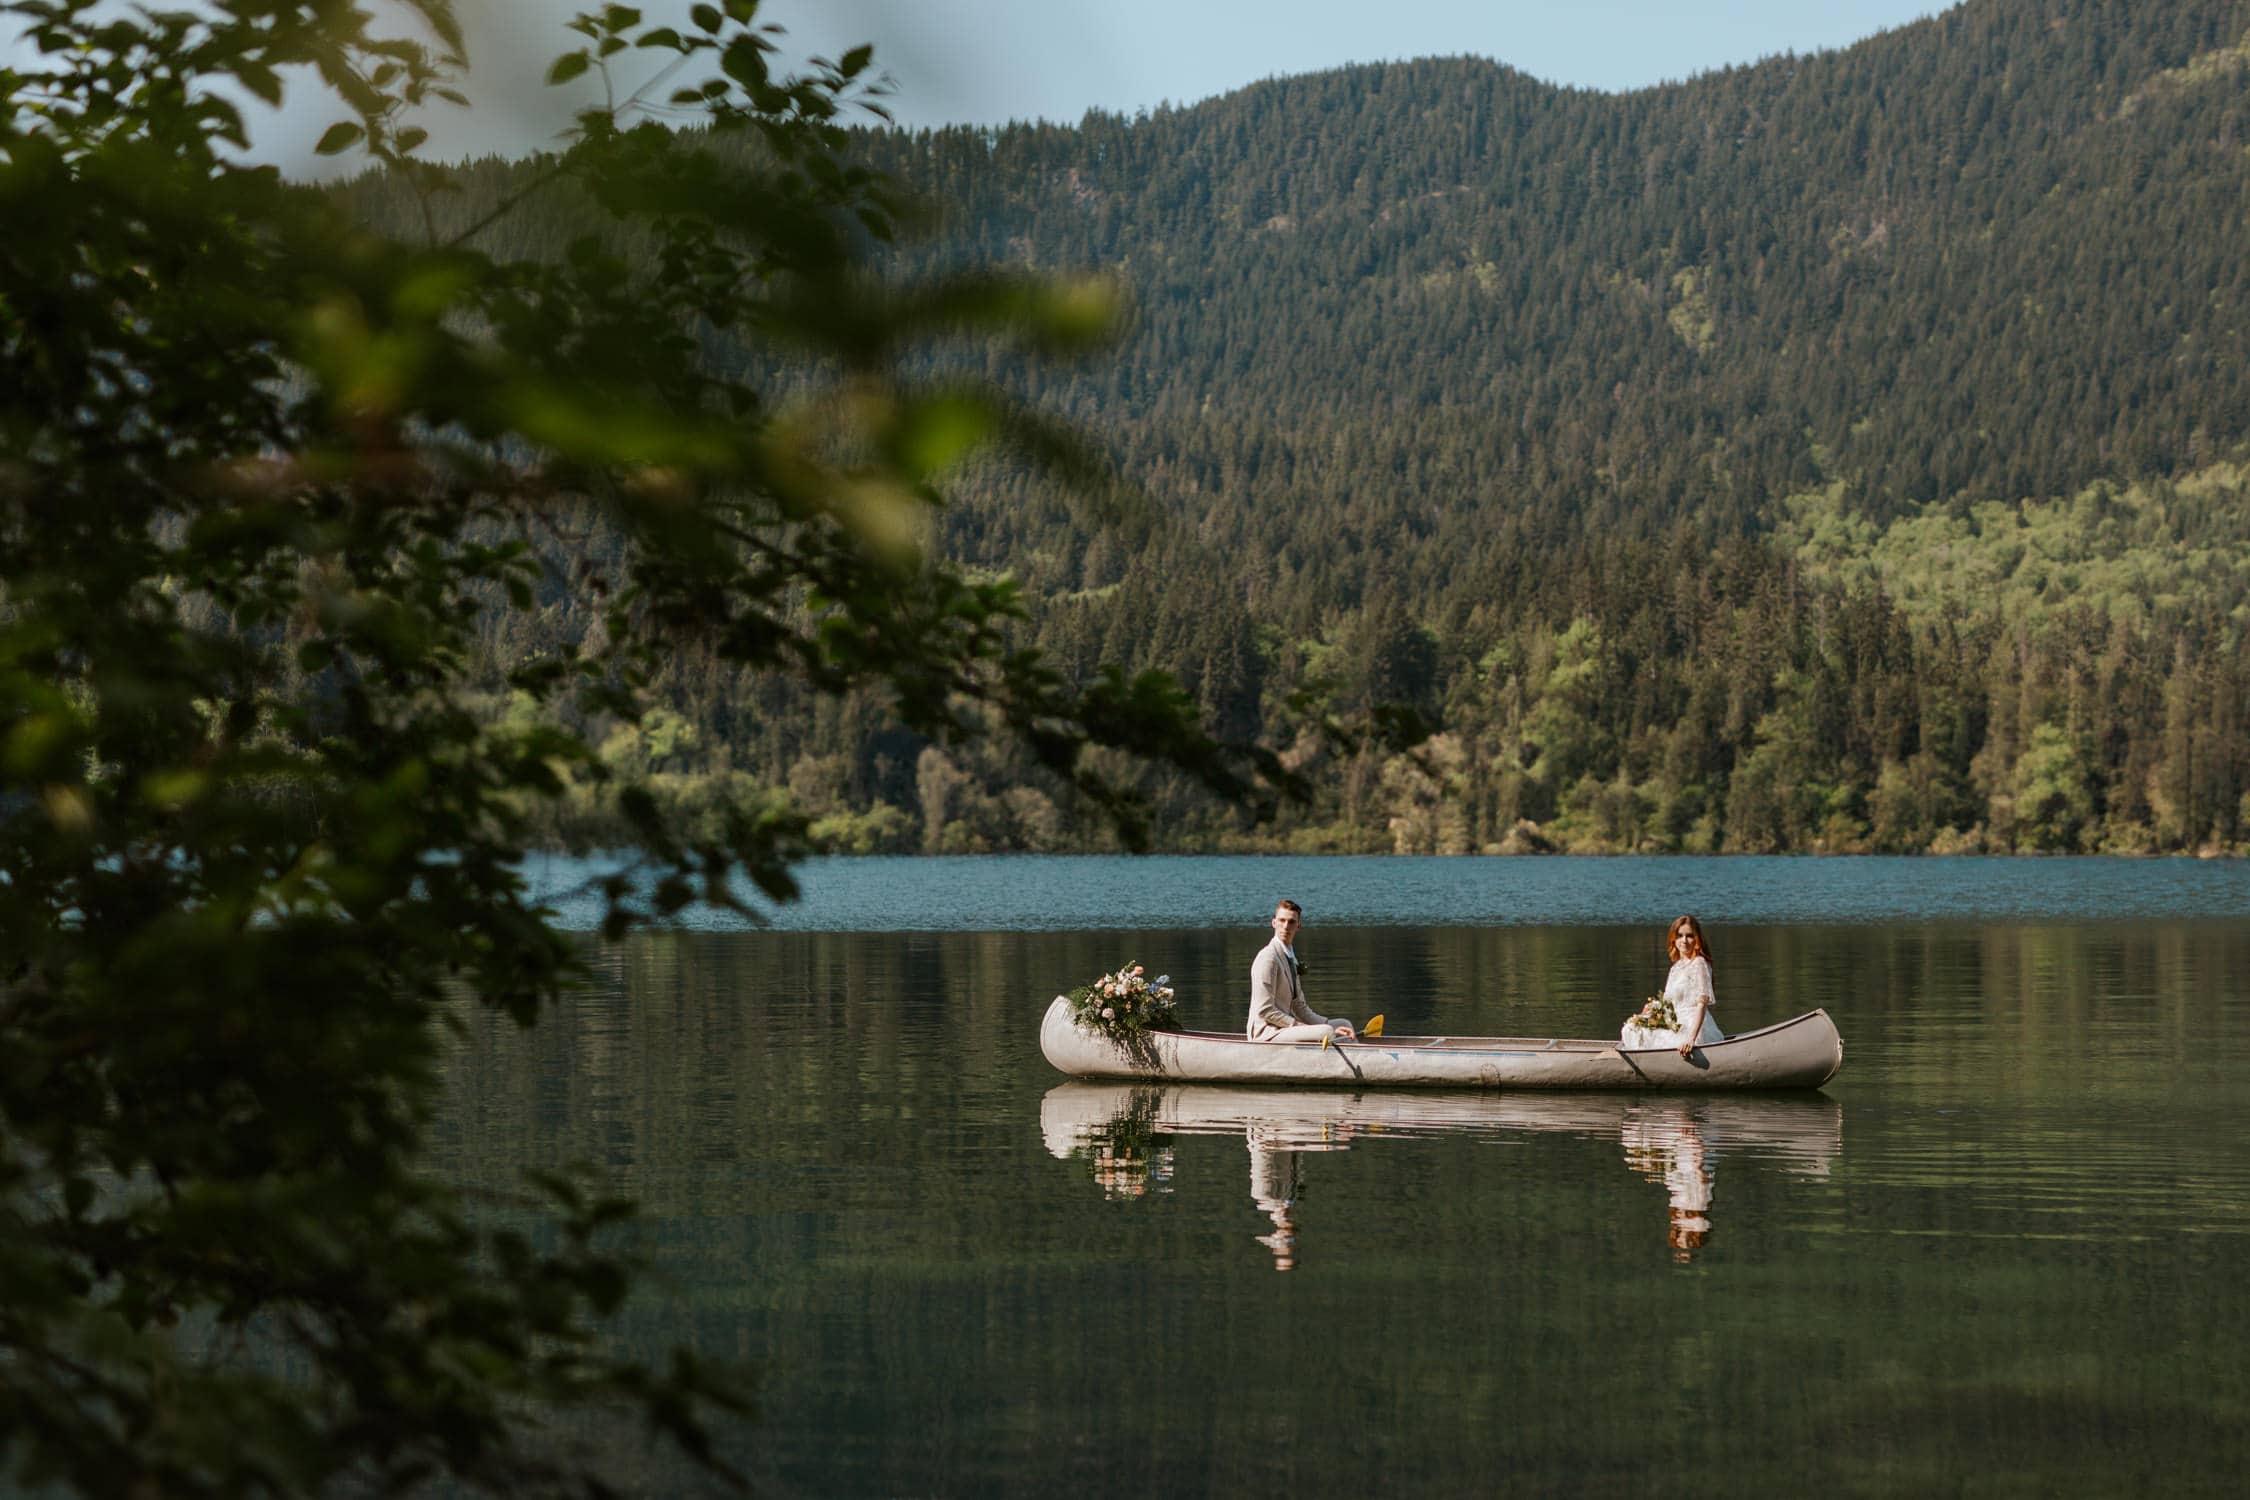 A couple in wedding attire canoeing on Lake Sutherland in Olympic National Park on their wedding day.